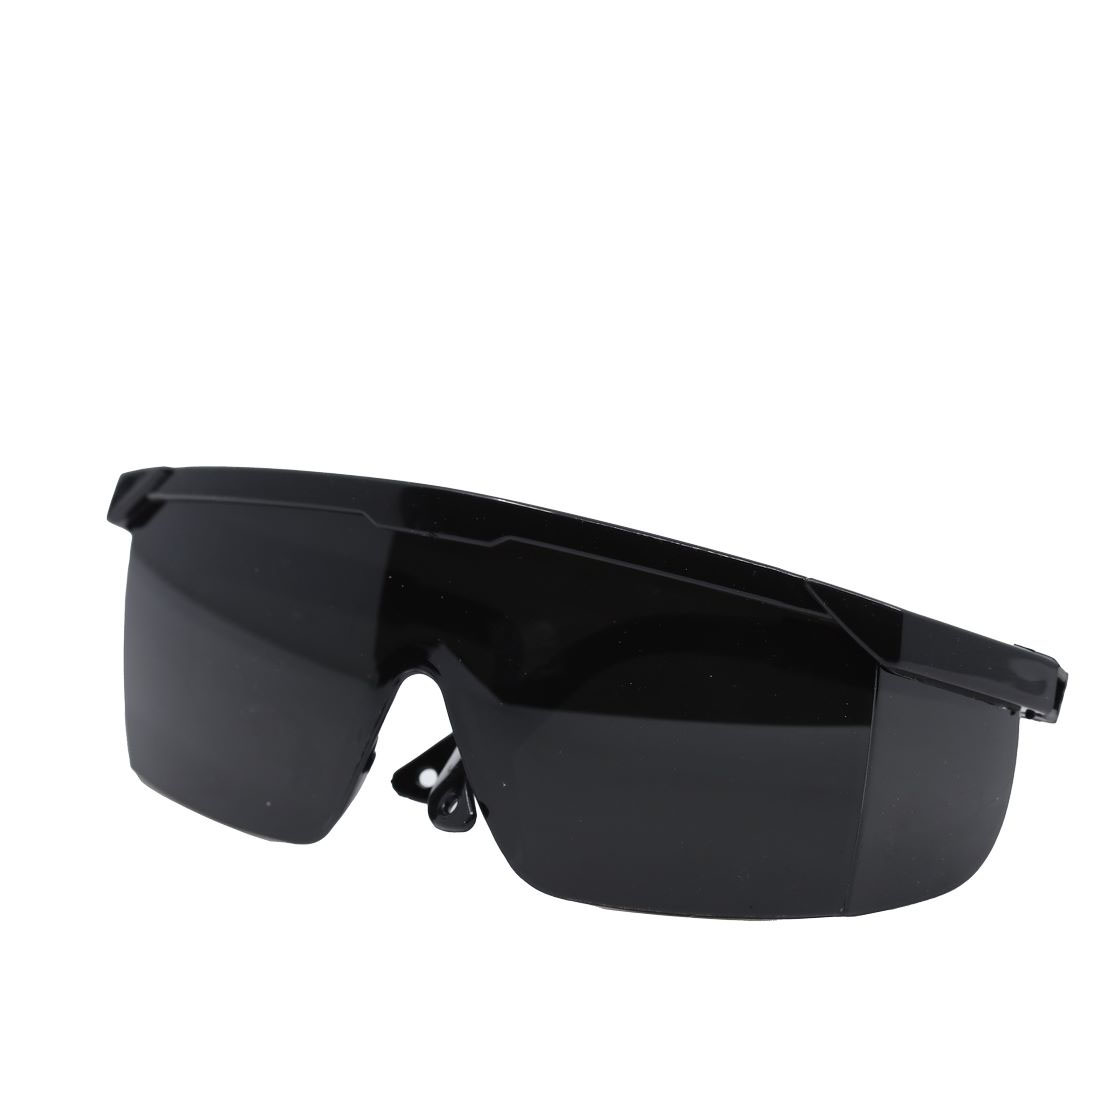 Buy DUST GOGGLES CLEAR / BLACK Online | Safety | Qetaat.com